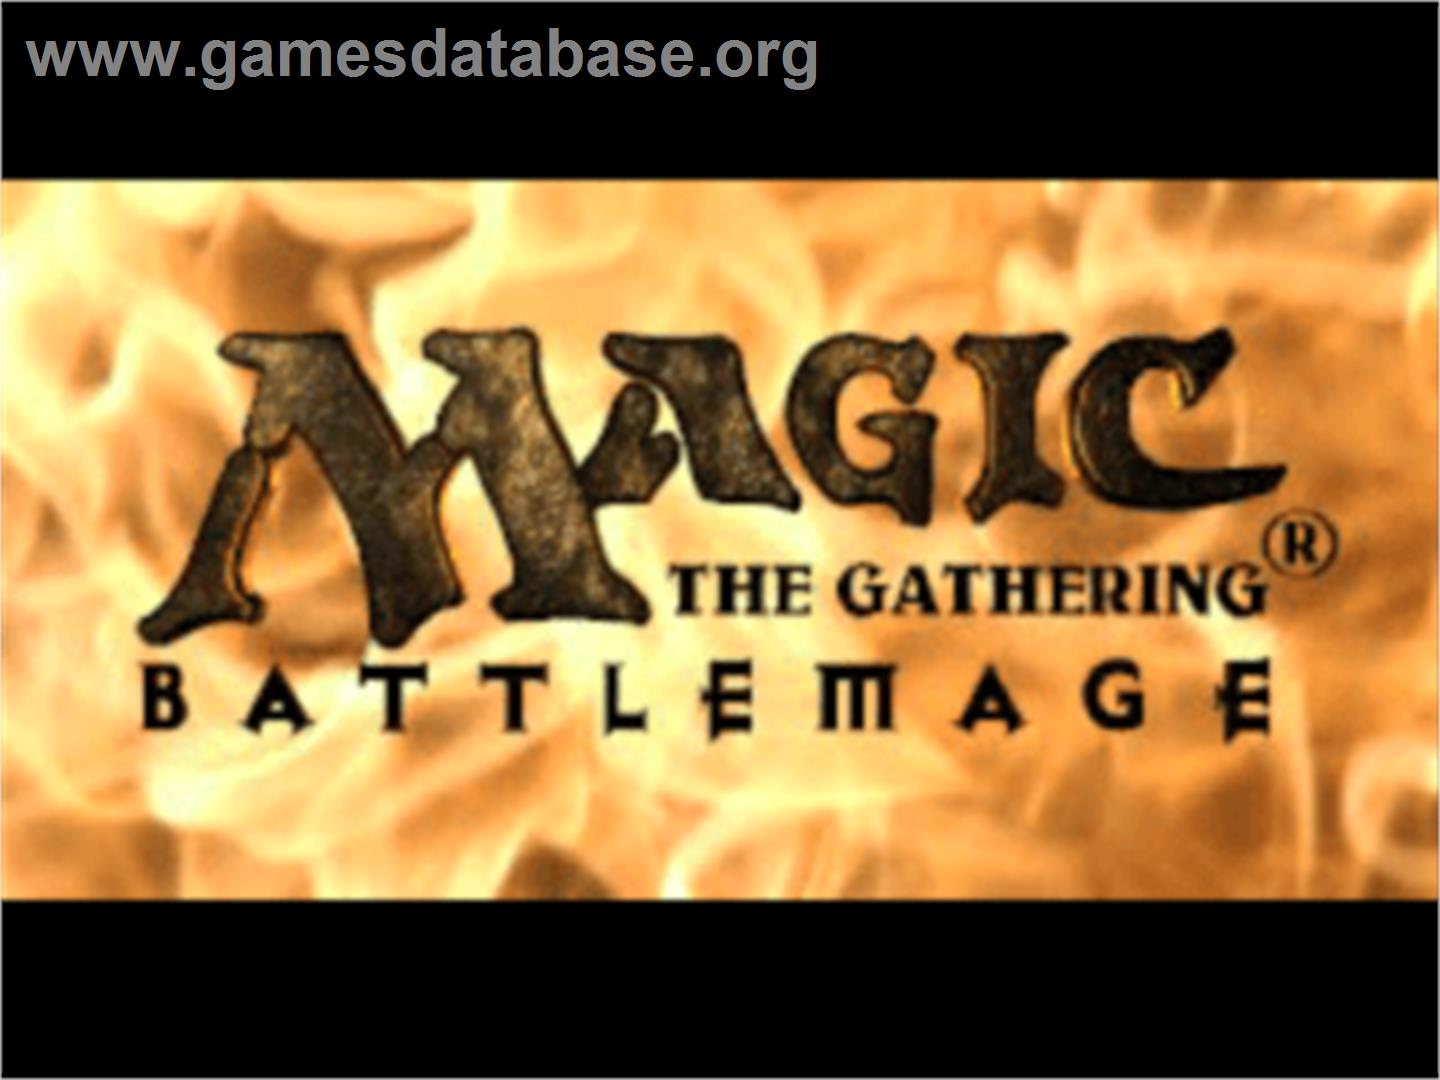 Magic: The Gathering - Battlemage - Sony Playstation - Artwork - Title Screen